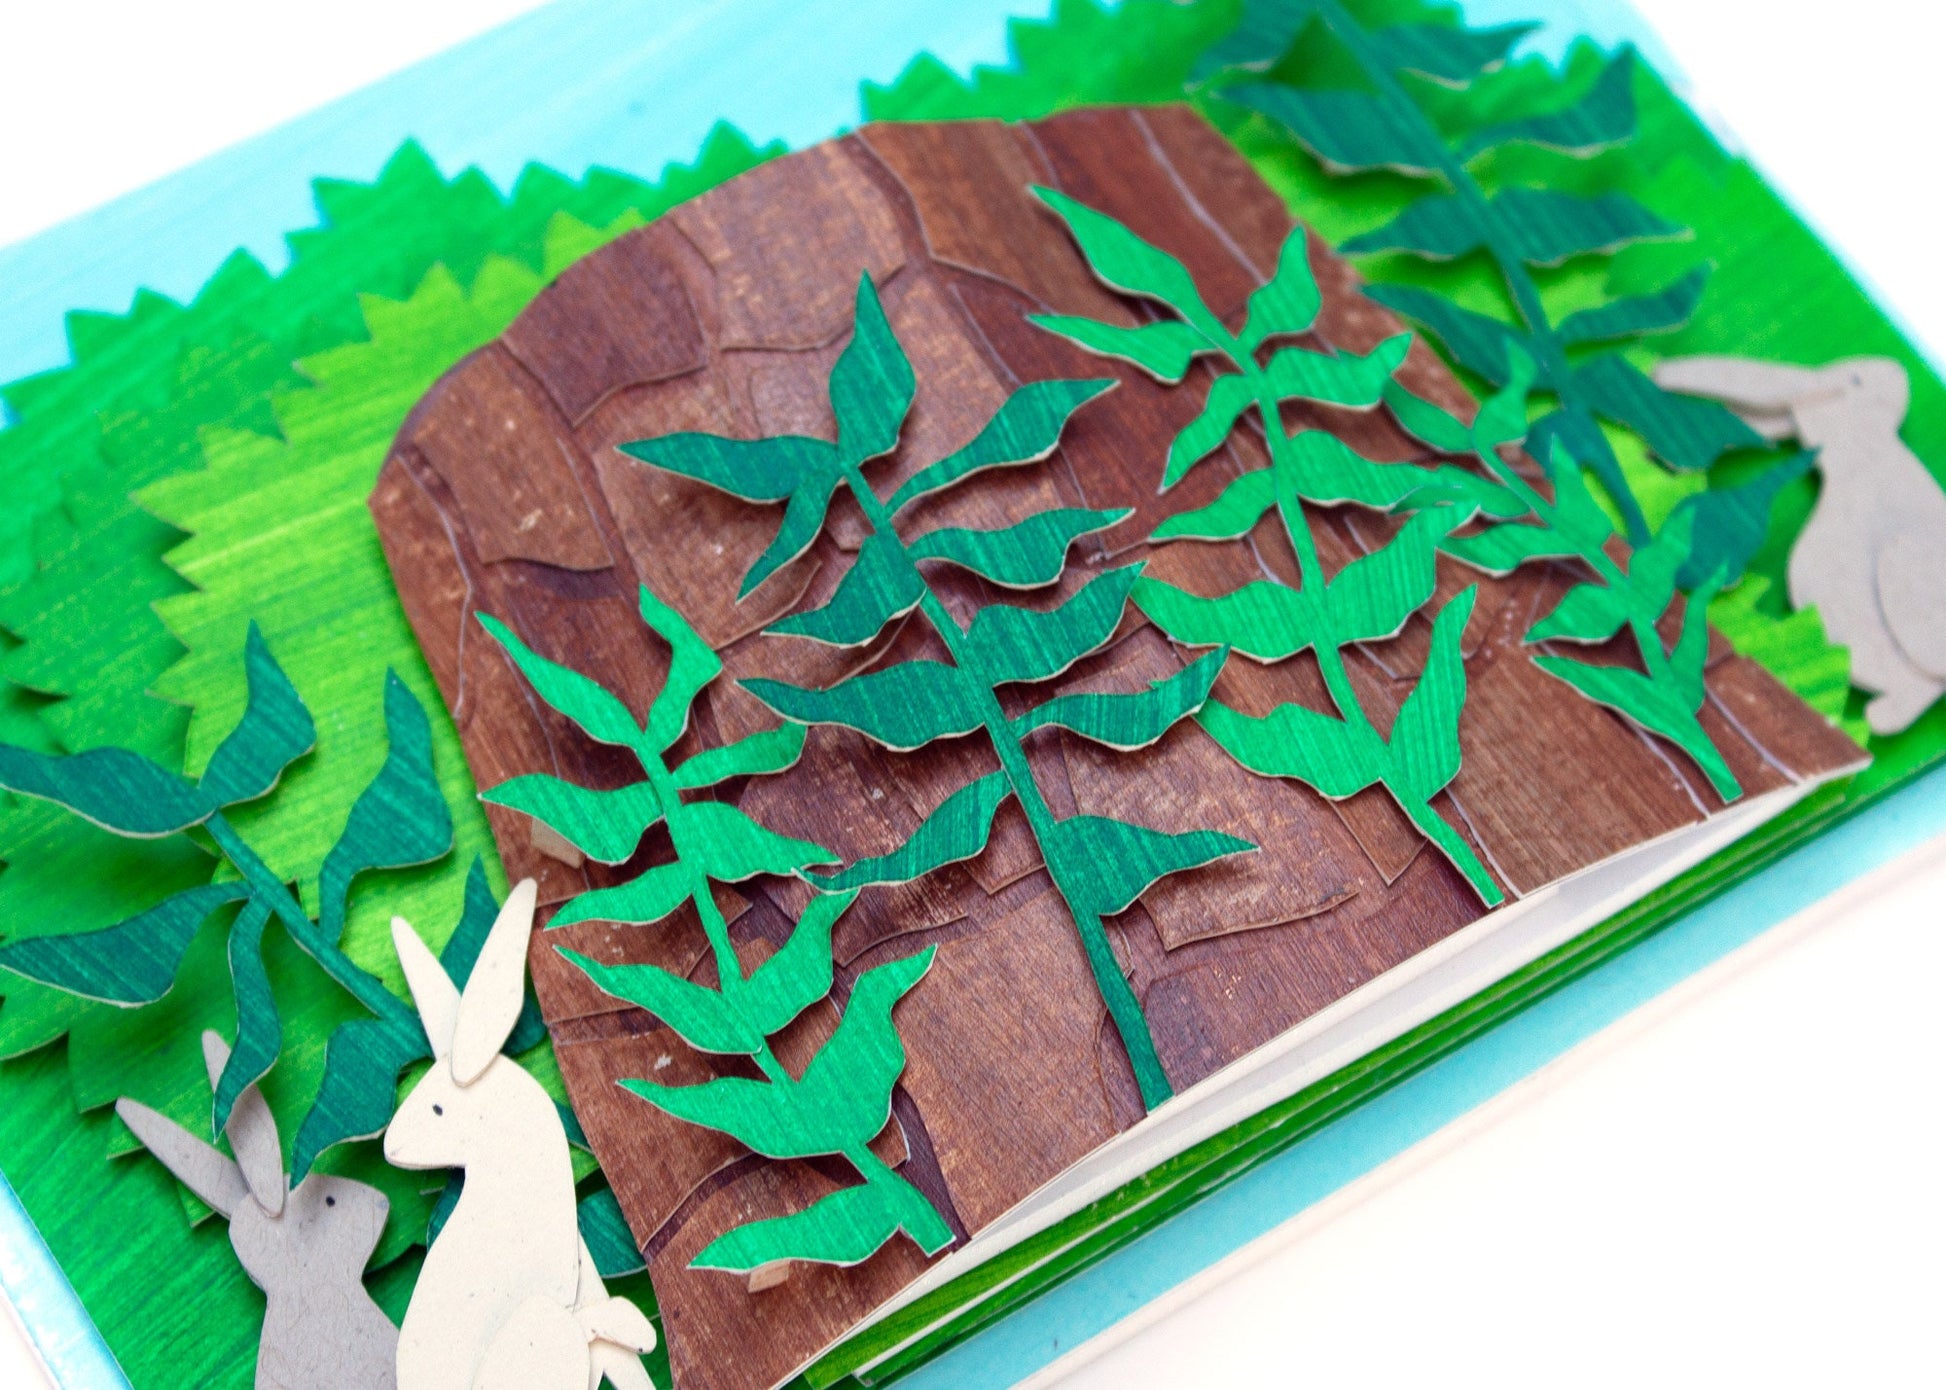 Image showing details of cut paper illustration of bunnies around a tree stump in bushes.